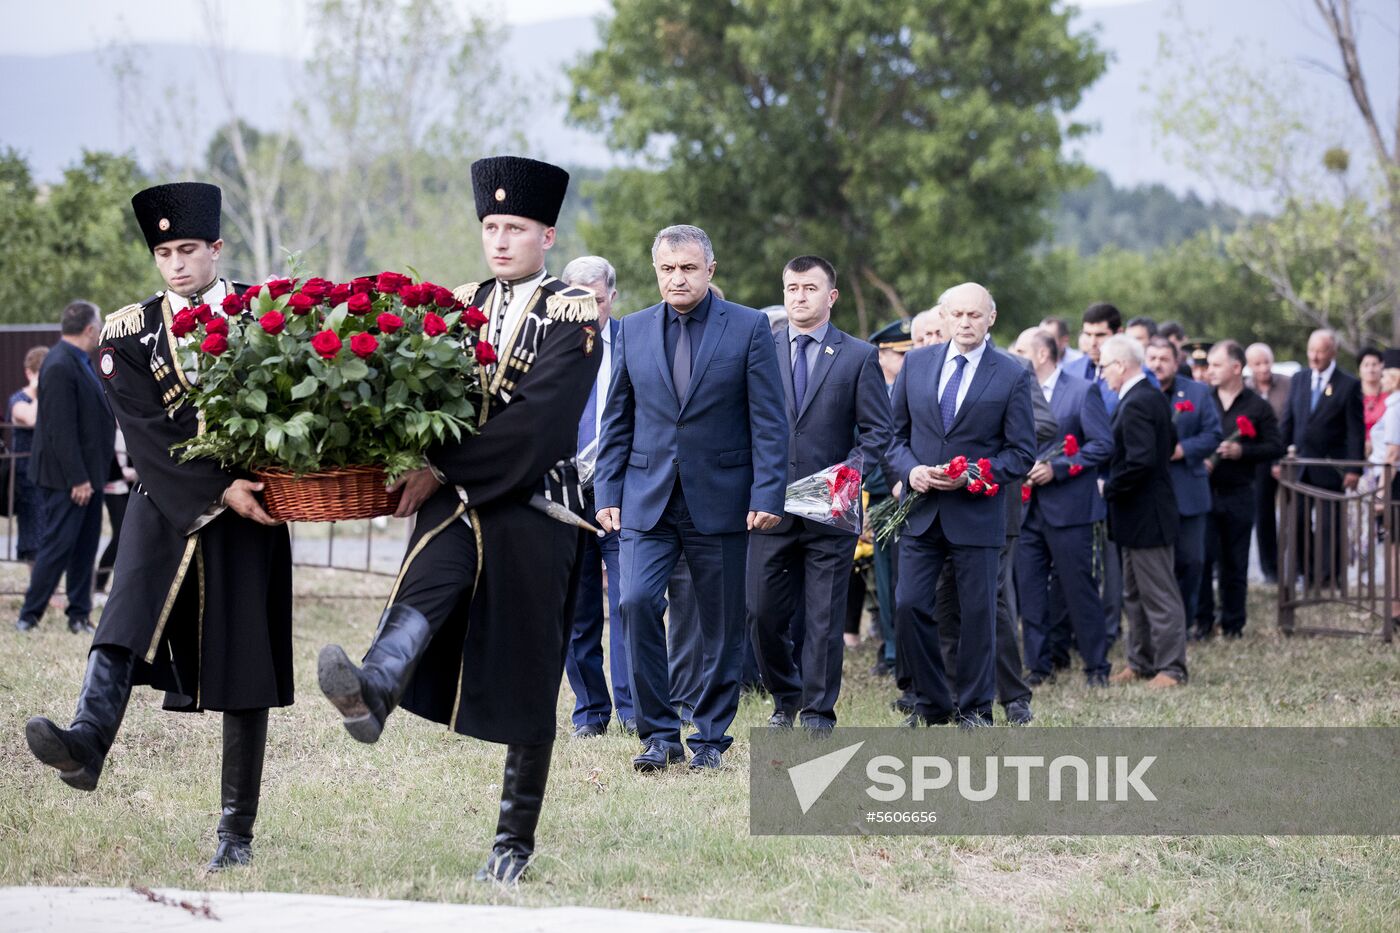 Abkhazia and South Ossetia commemorate those killed in conflict with Georgia